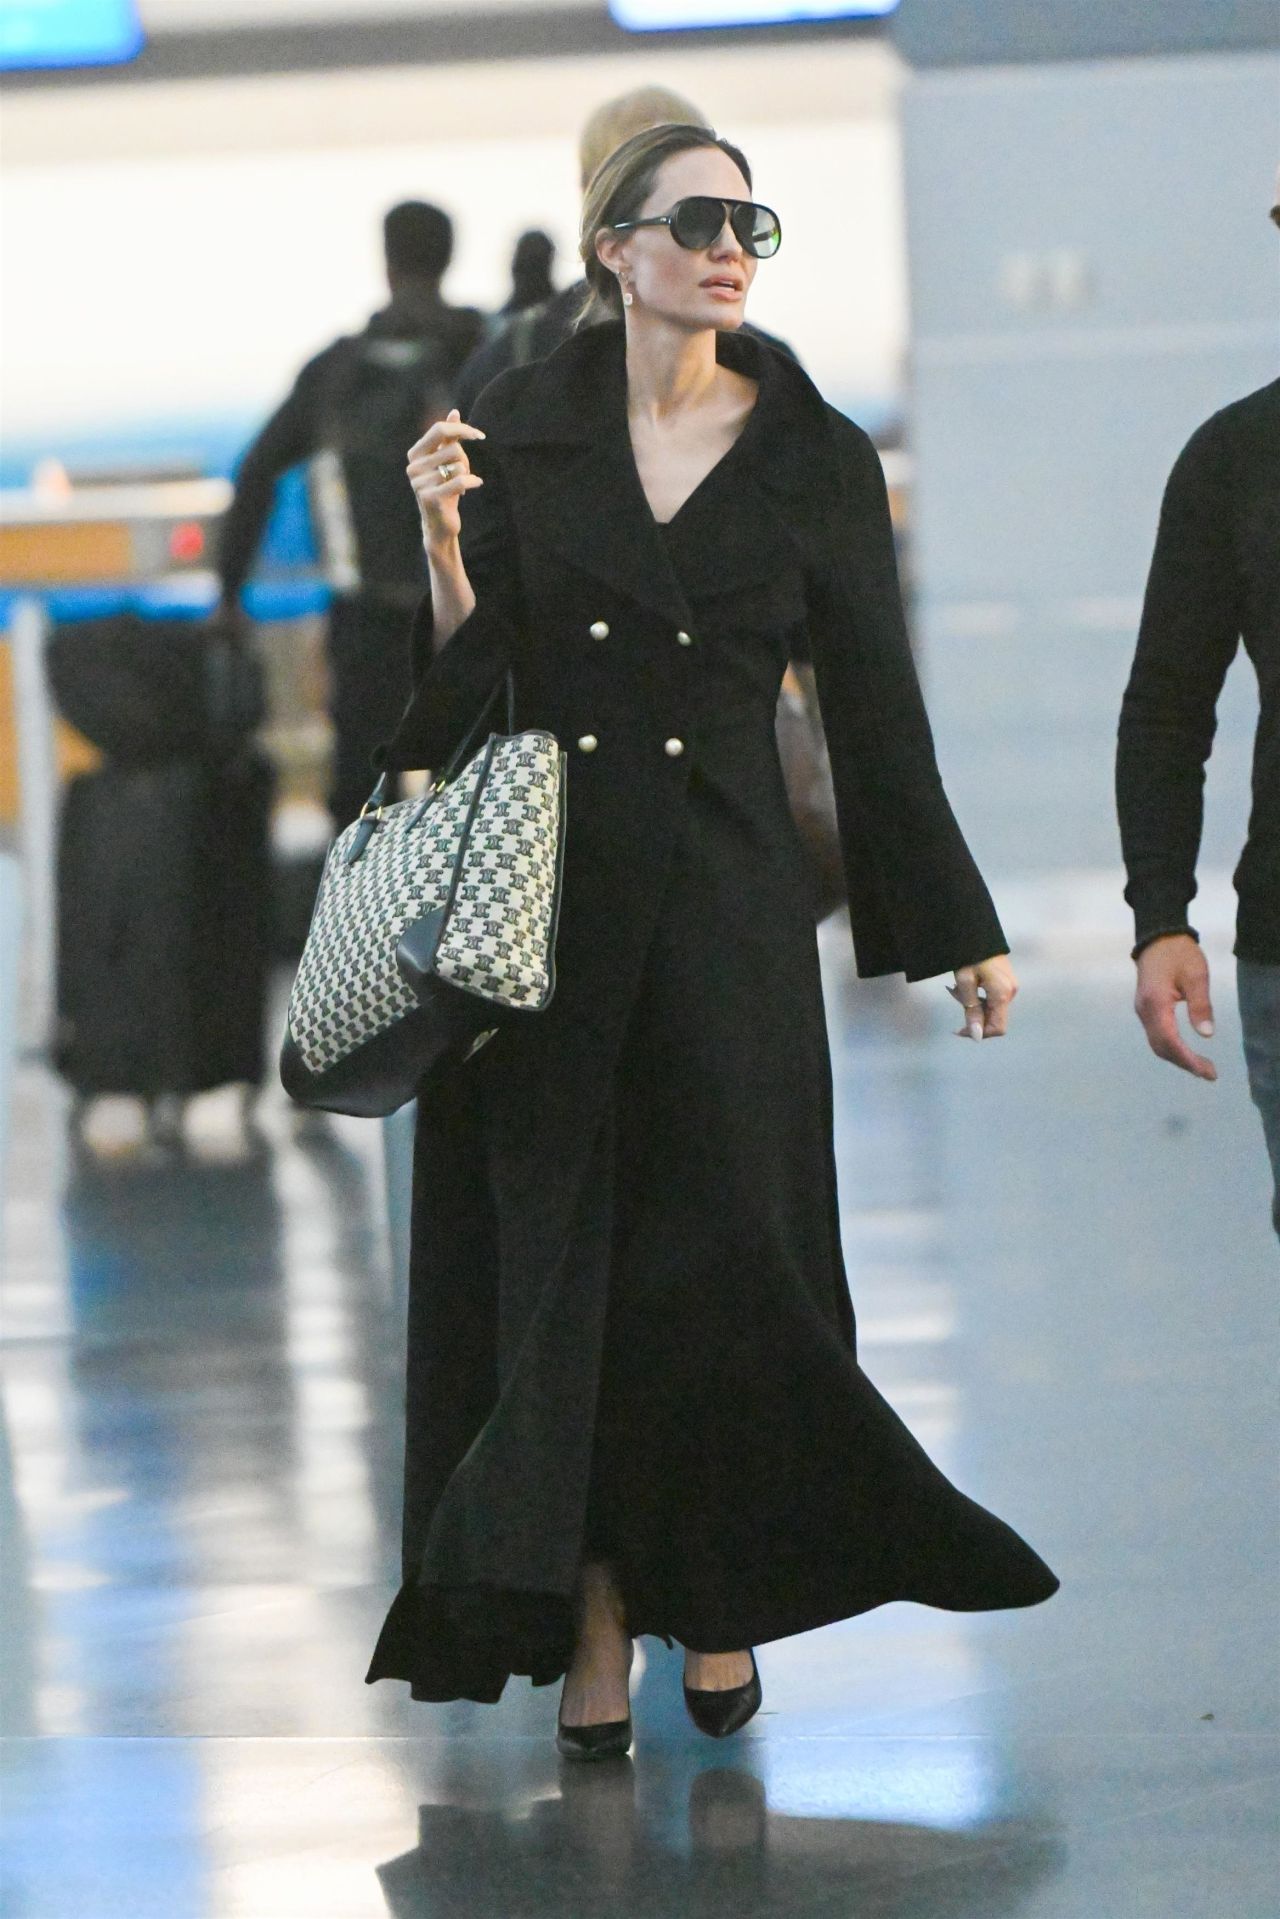 Angelina Jolie Wore a Dior Handbag With a Black Disposable Face Mask